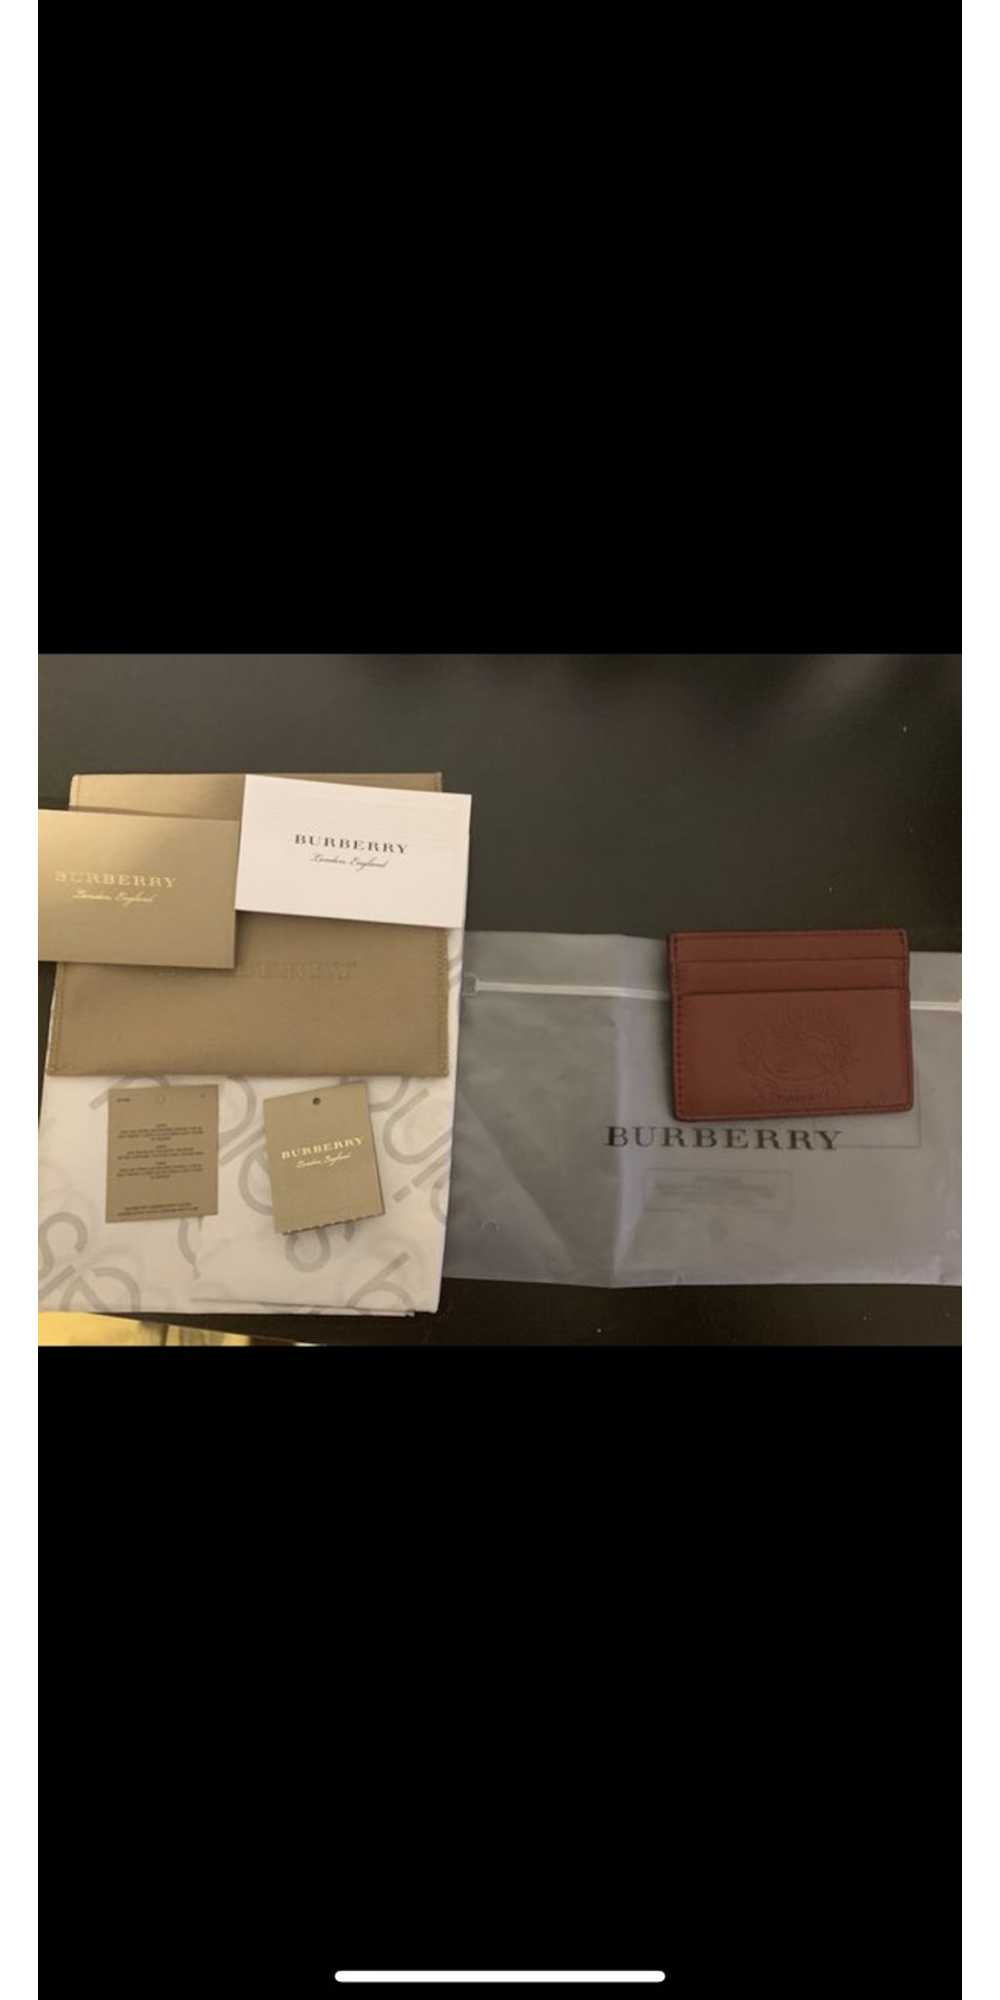 Burberry Burberry wallet - image 6